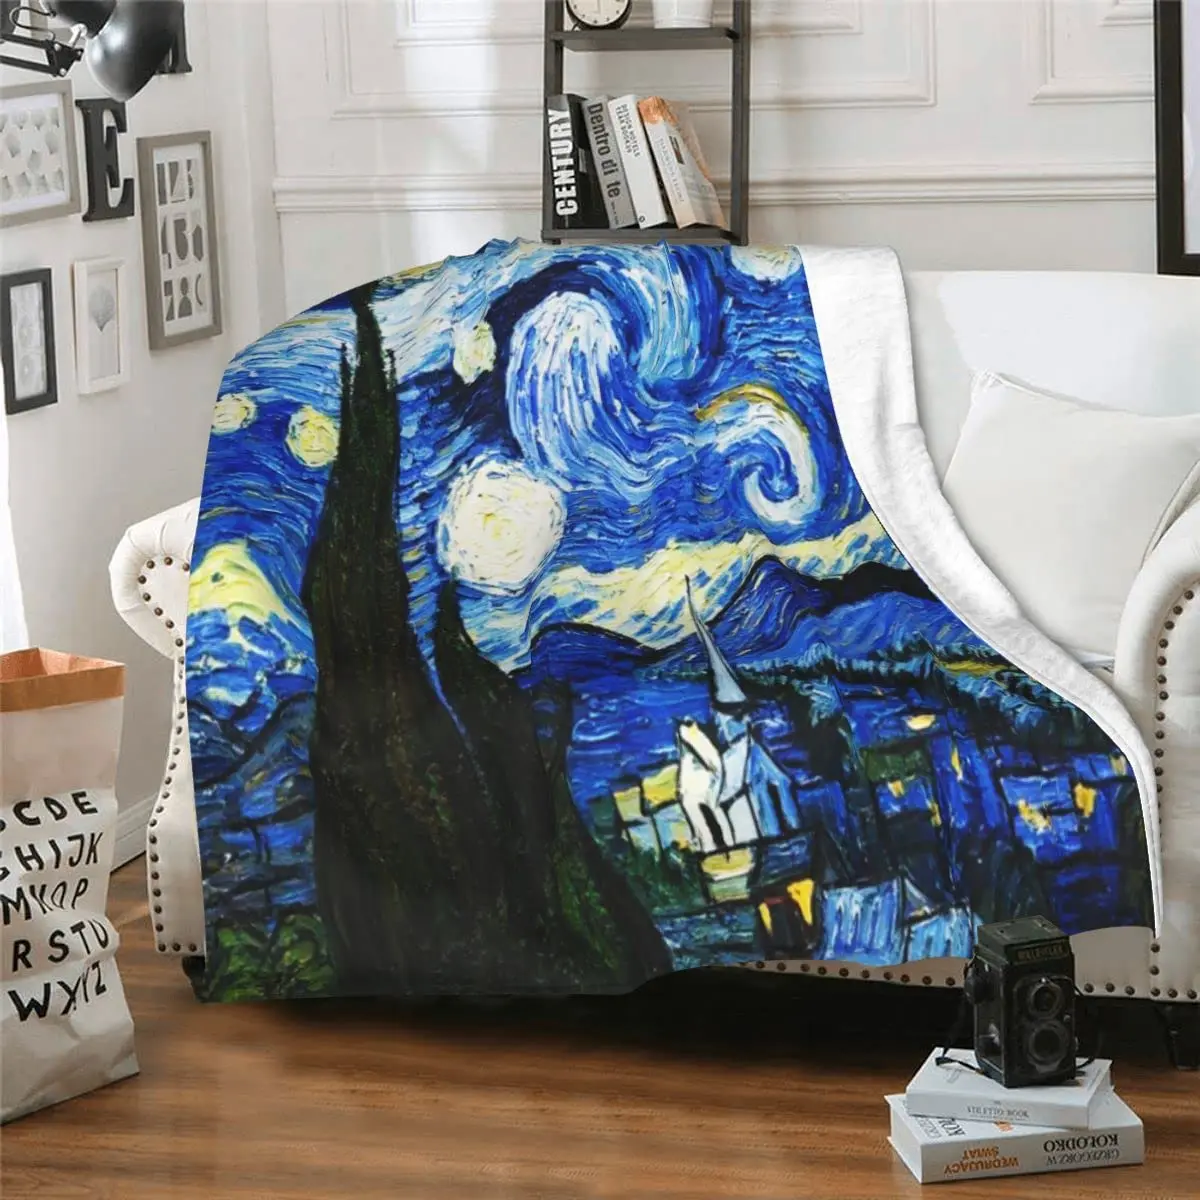 

Van Gogh The Starry Night Flannel Throw Blanket Soft Cozy Warm Bed Blanket All Season Blanket for Couch Bed Sofa Fall Nap Travel